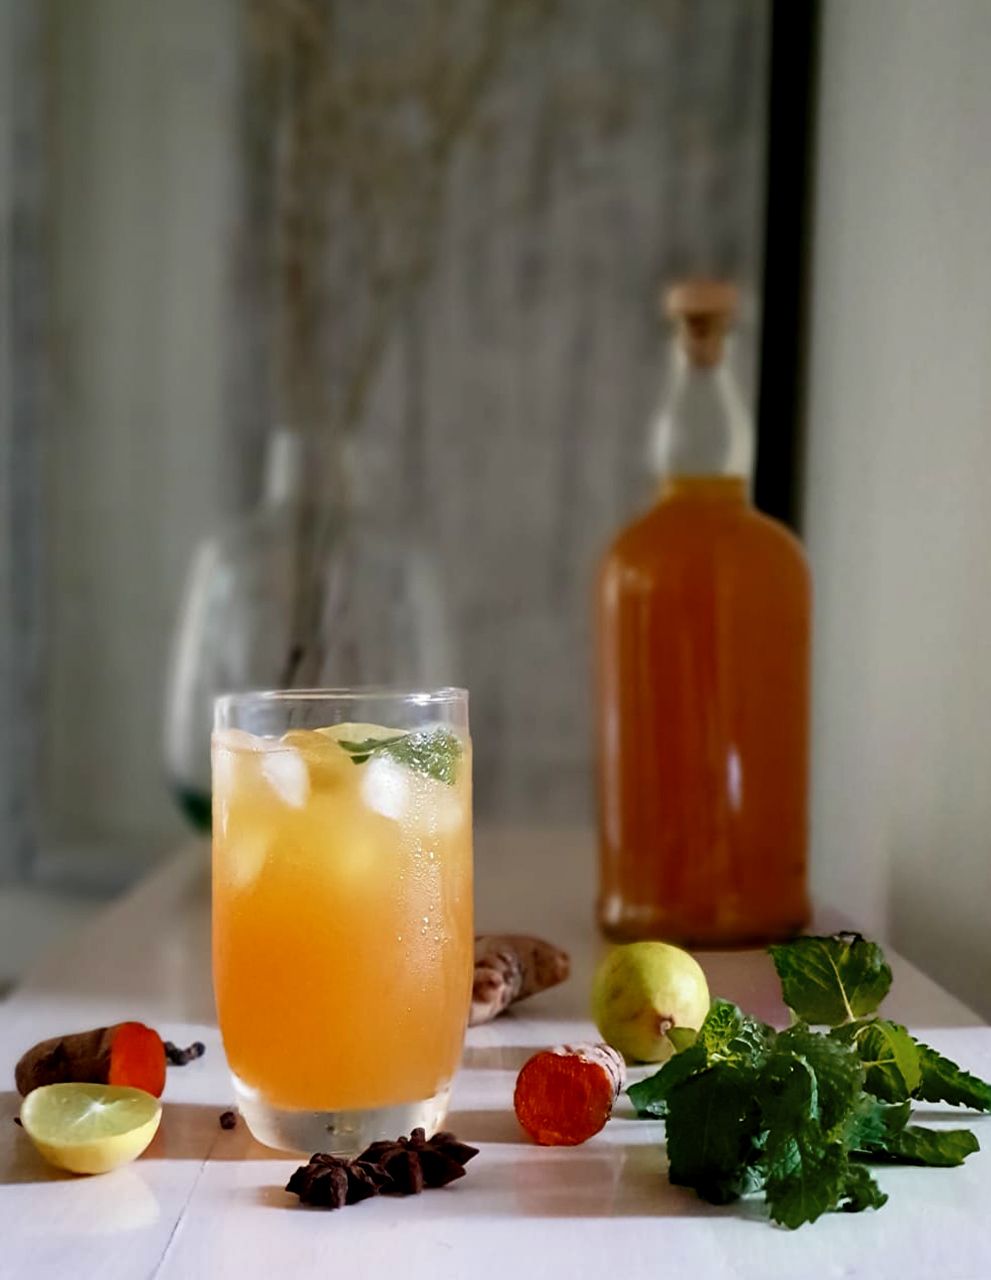 Homemade Turmeric and Ginger Ale